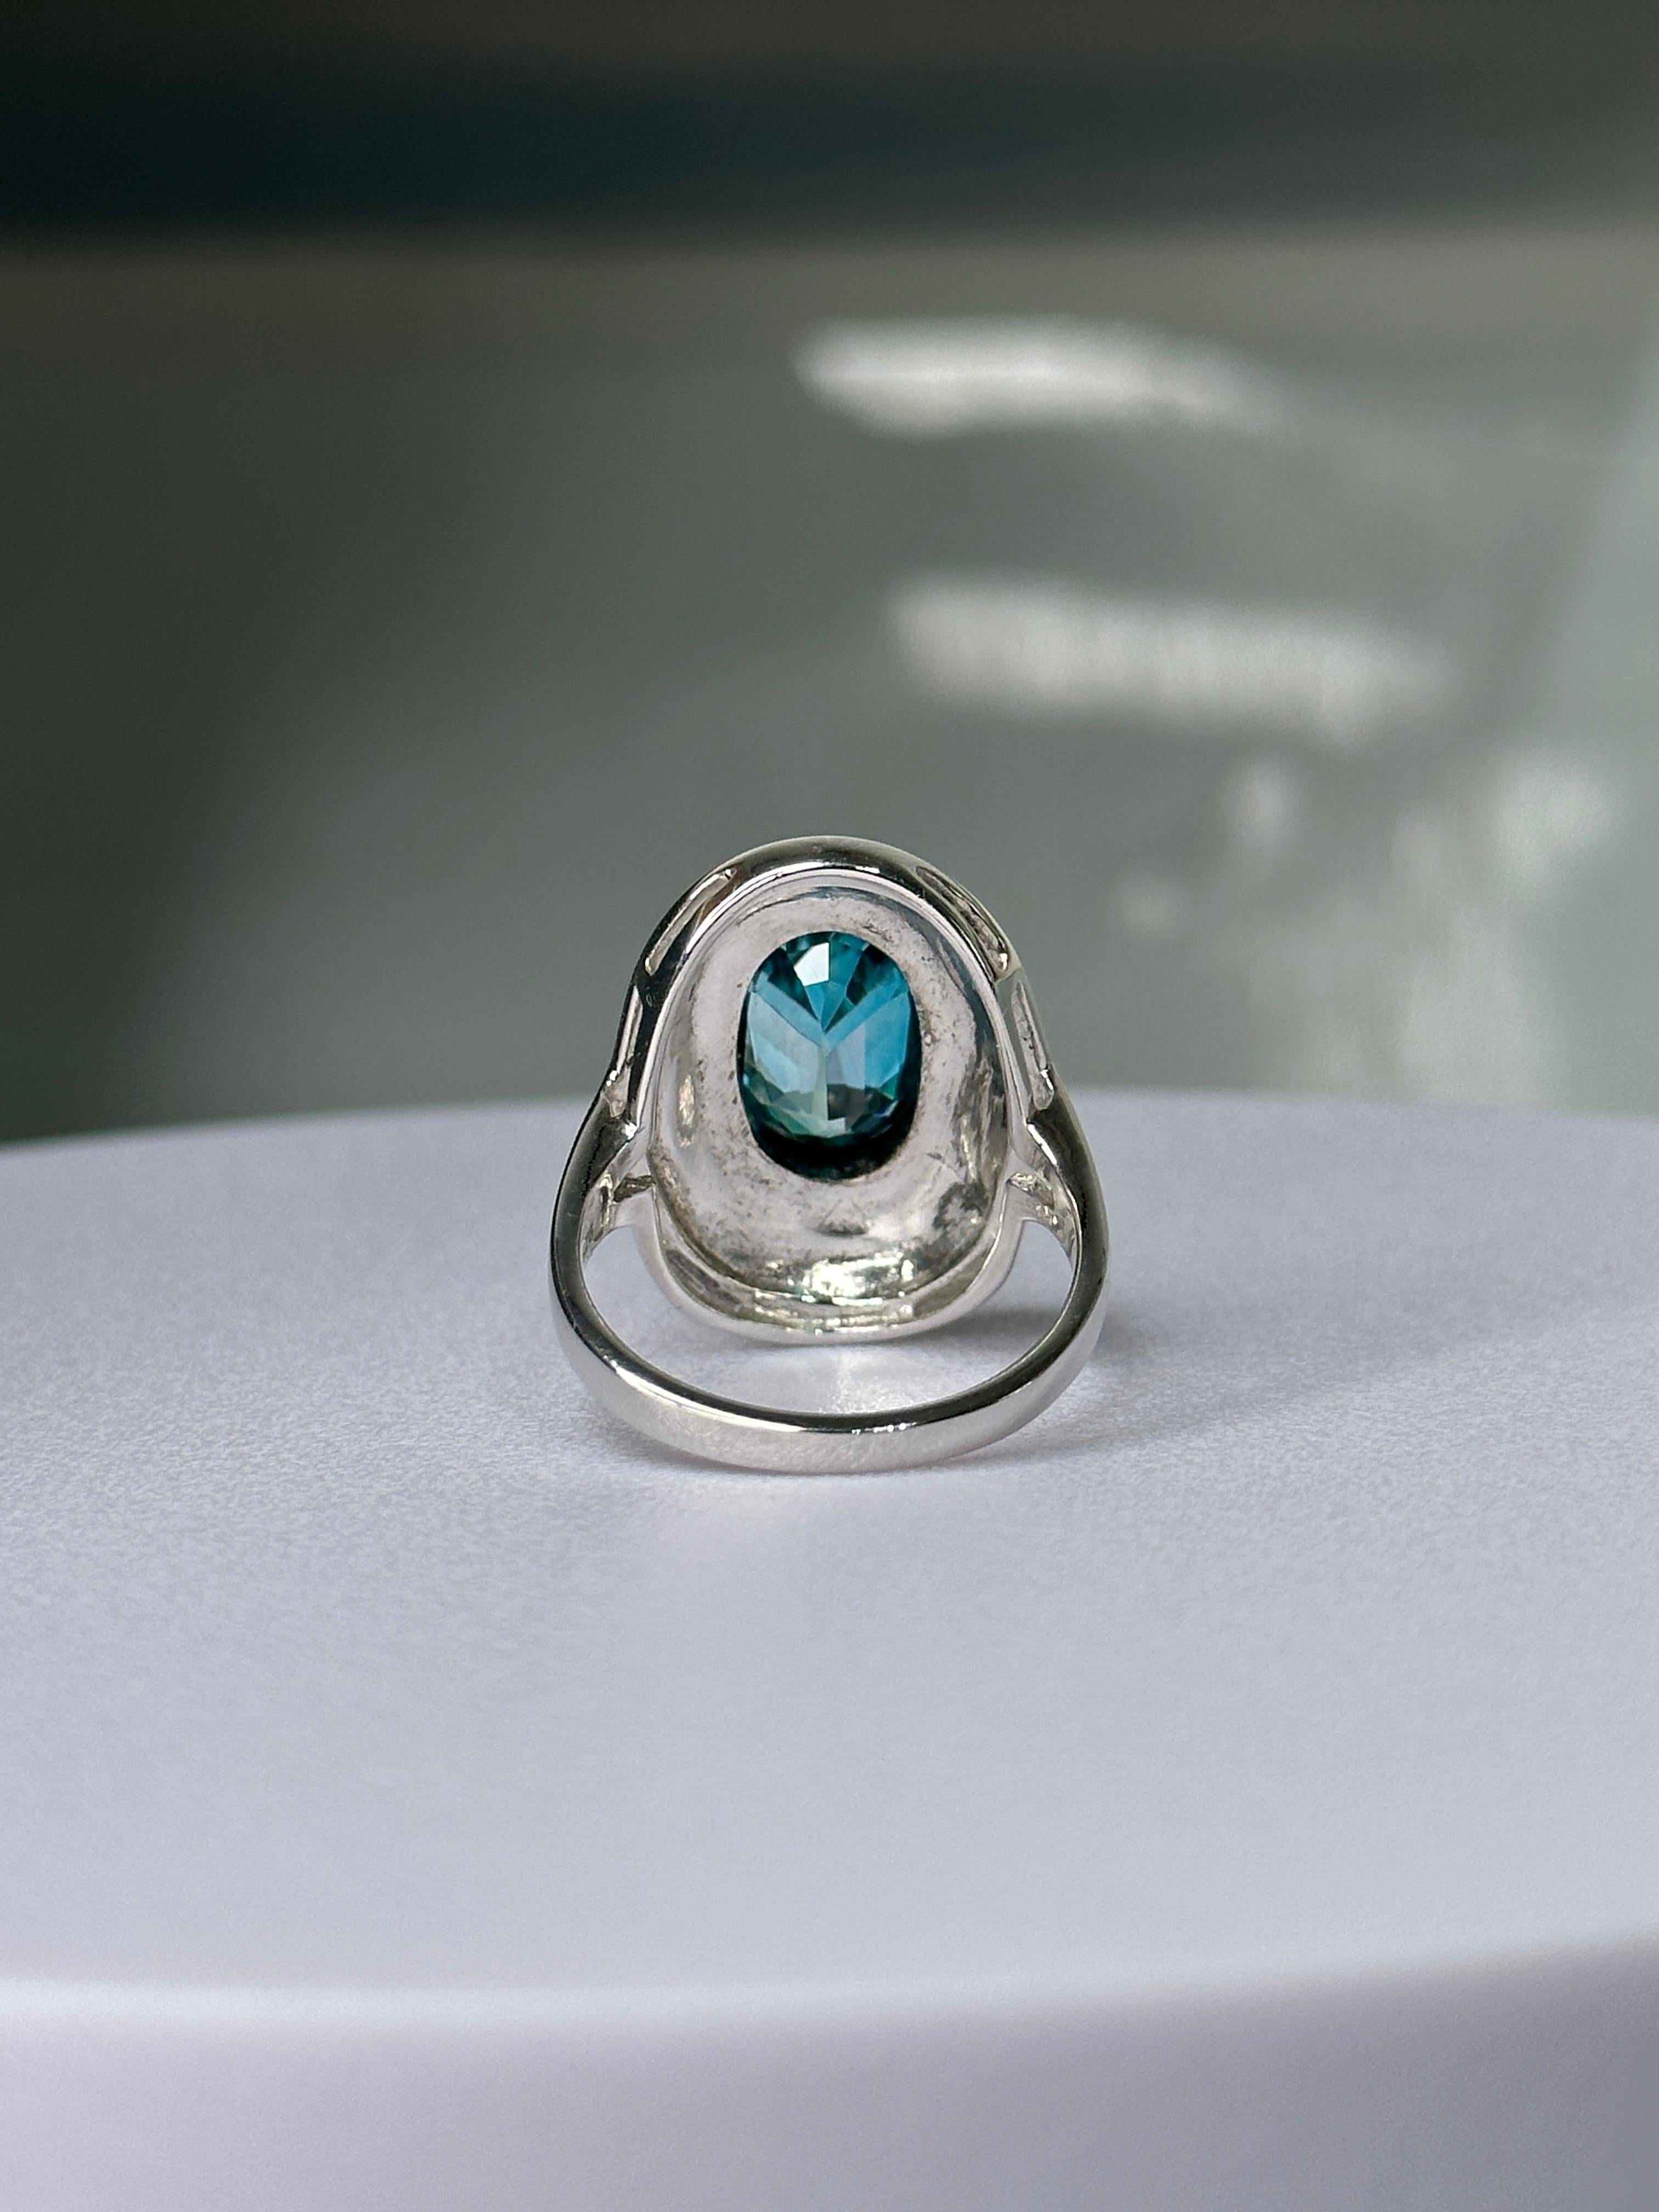 Orloff of Denmark, 4.68 ct Metallic Blue Zircon Ring in 925 Sterling Silver In New Condition For Sale In Hua Hin, TH